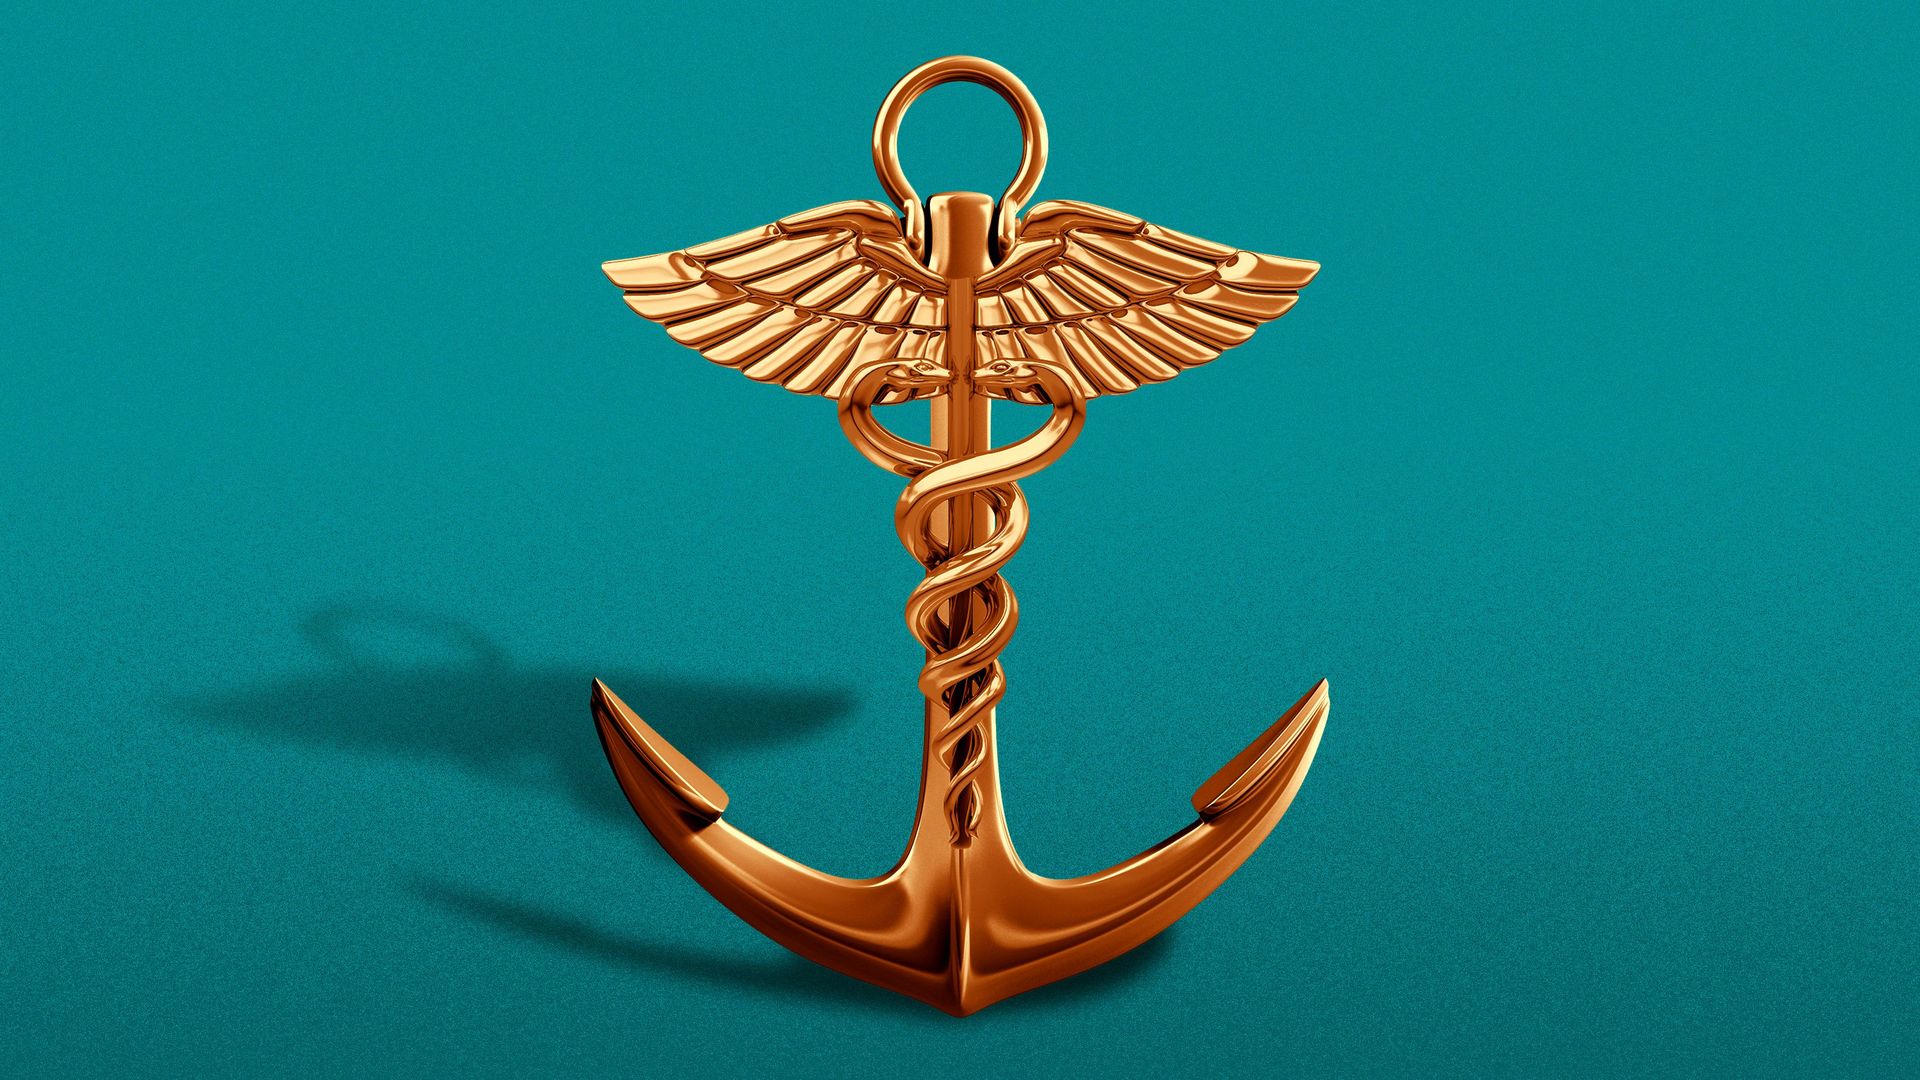 Illustration of an anchor made out of a caduceus.